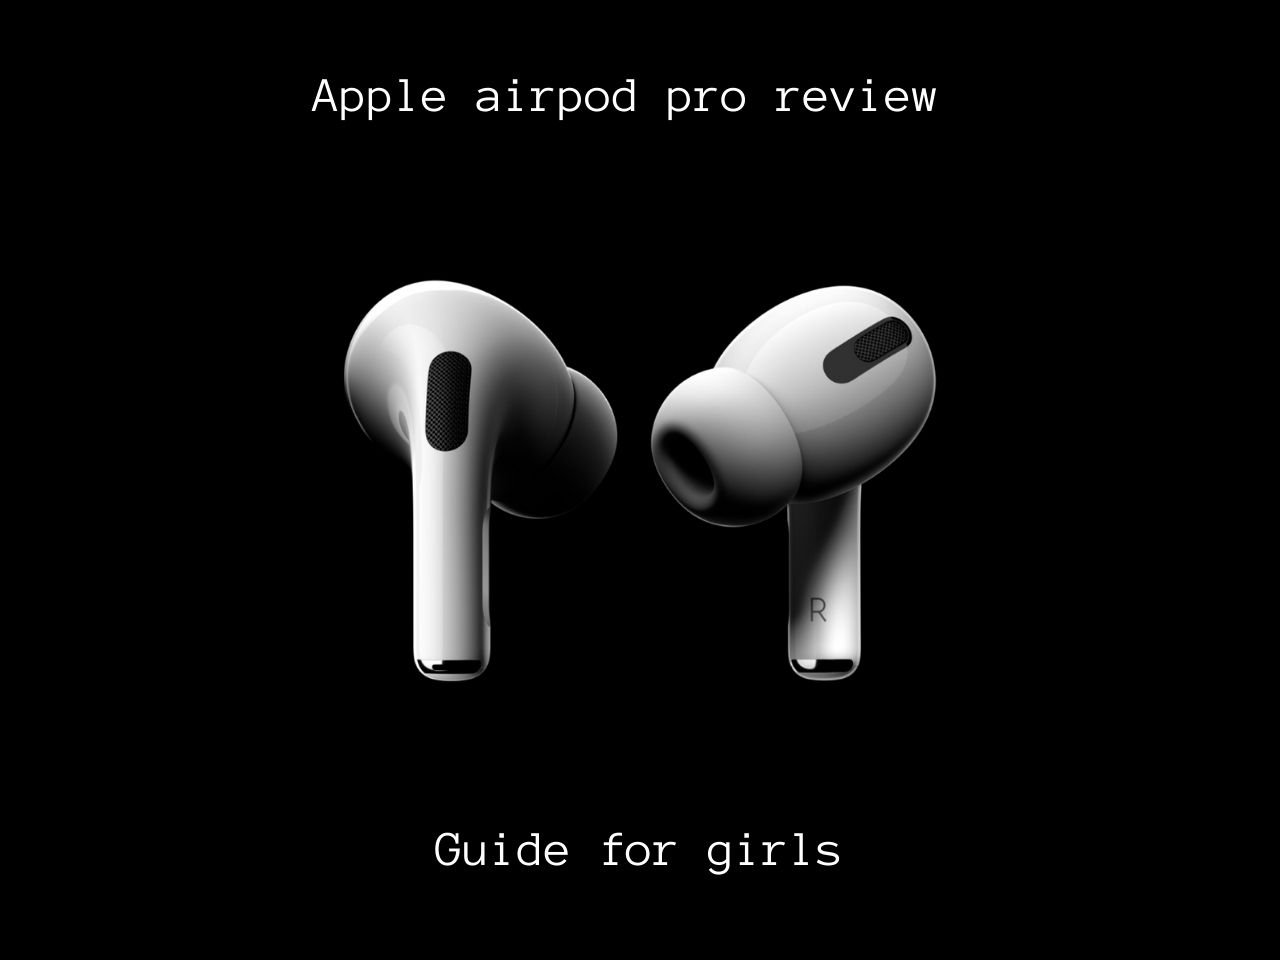 Apple airpod pro Review